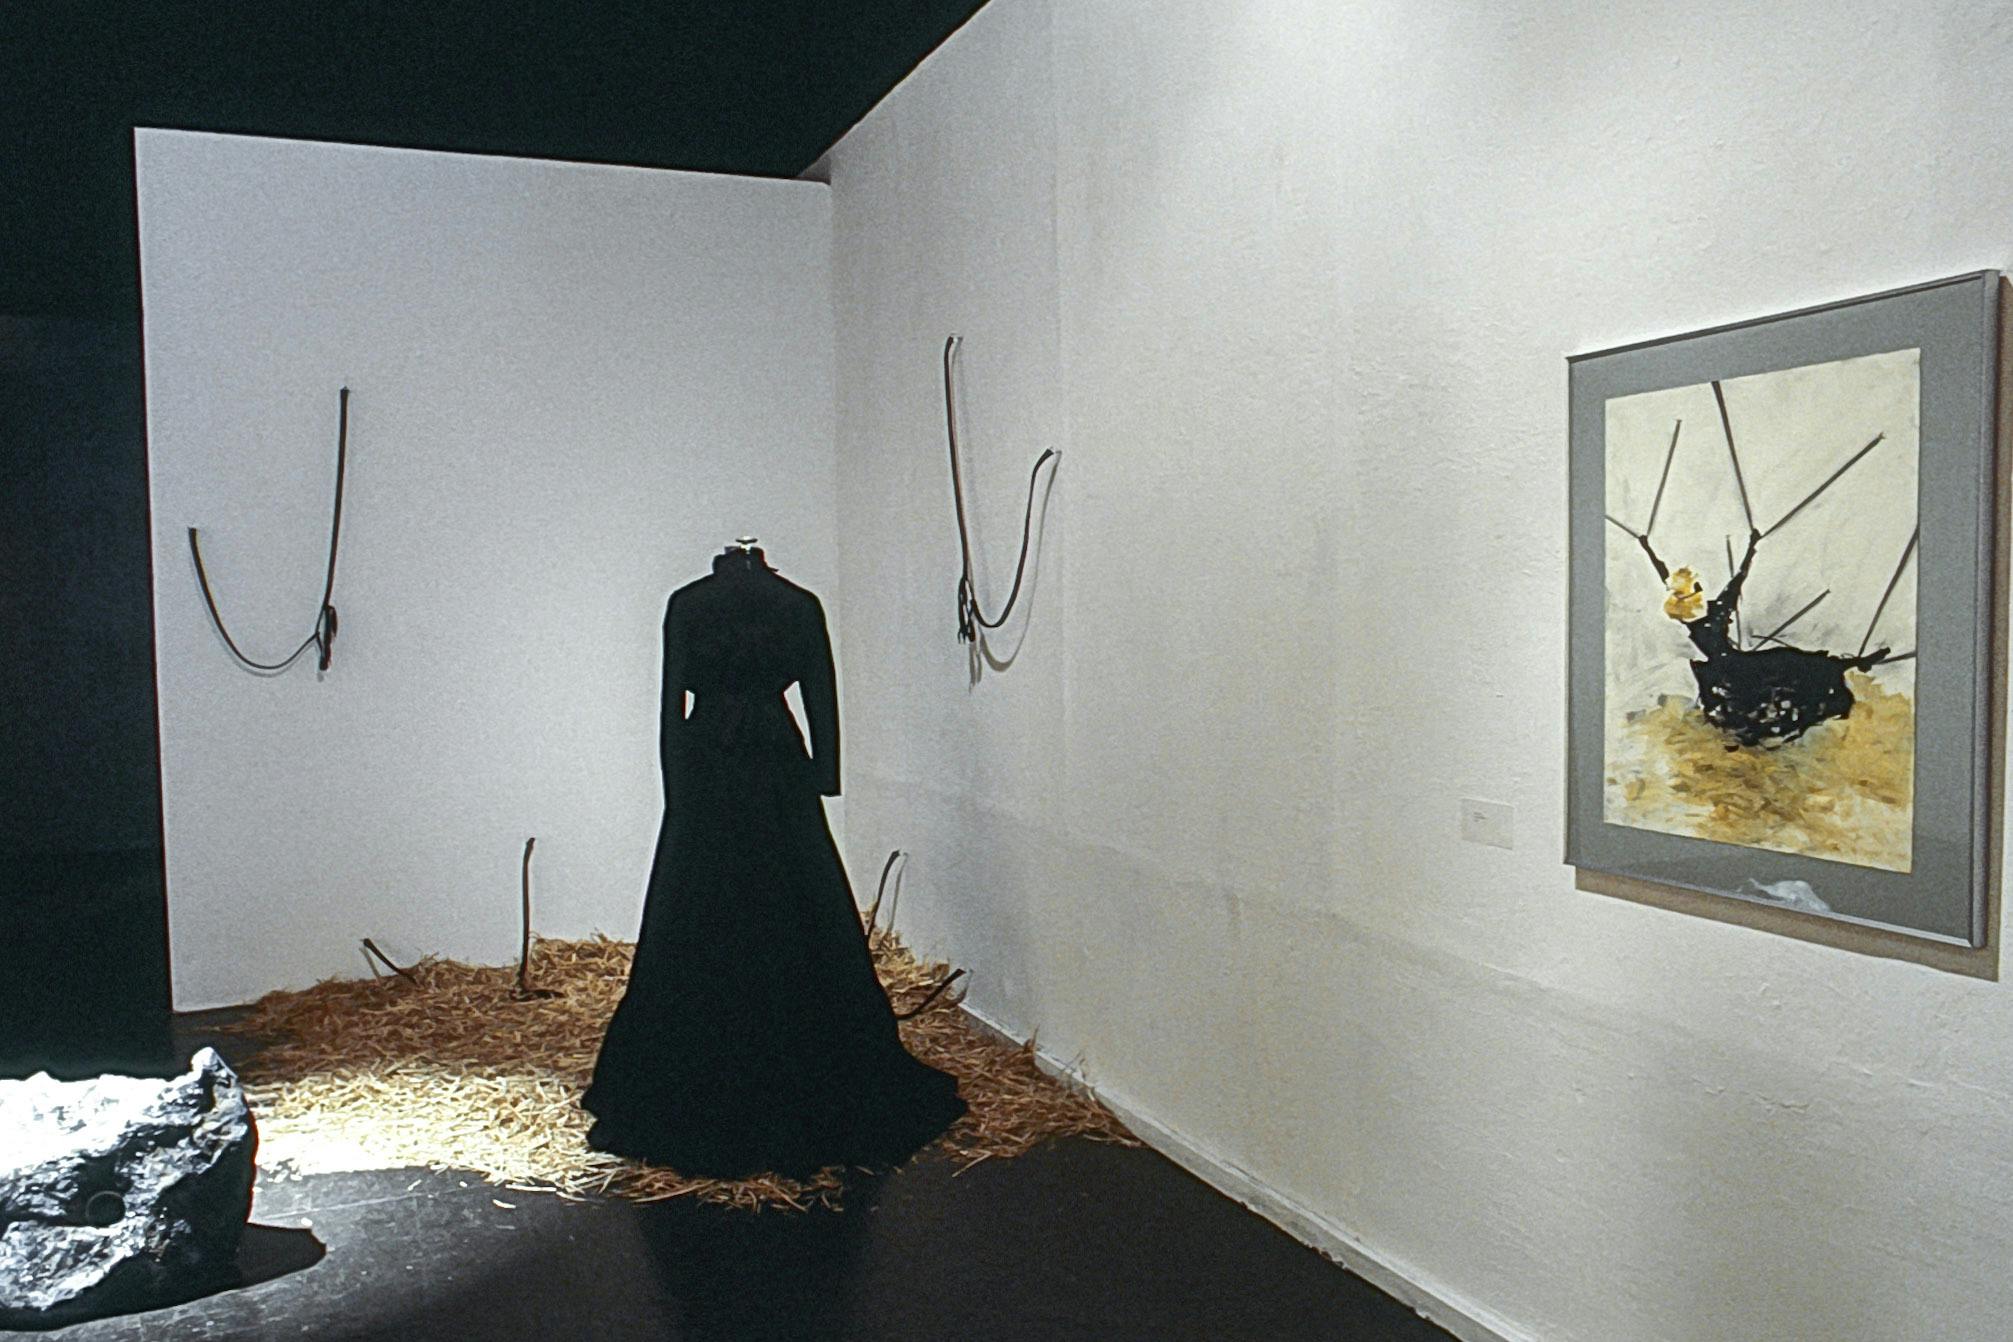 In the corner of a gallery, there is a long black dress on a mannequin, resting on pile of hay on the floor. Several cables are in the hay and on the wall, as well as a rock sculpture and a painting.